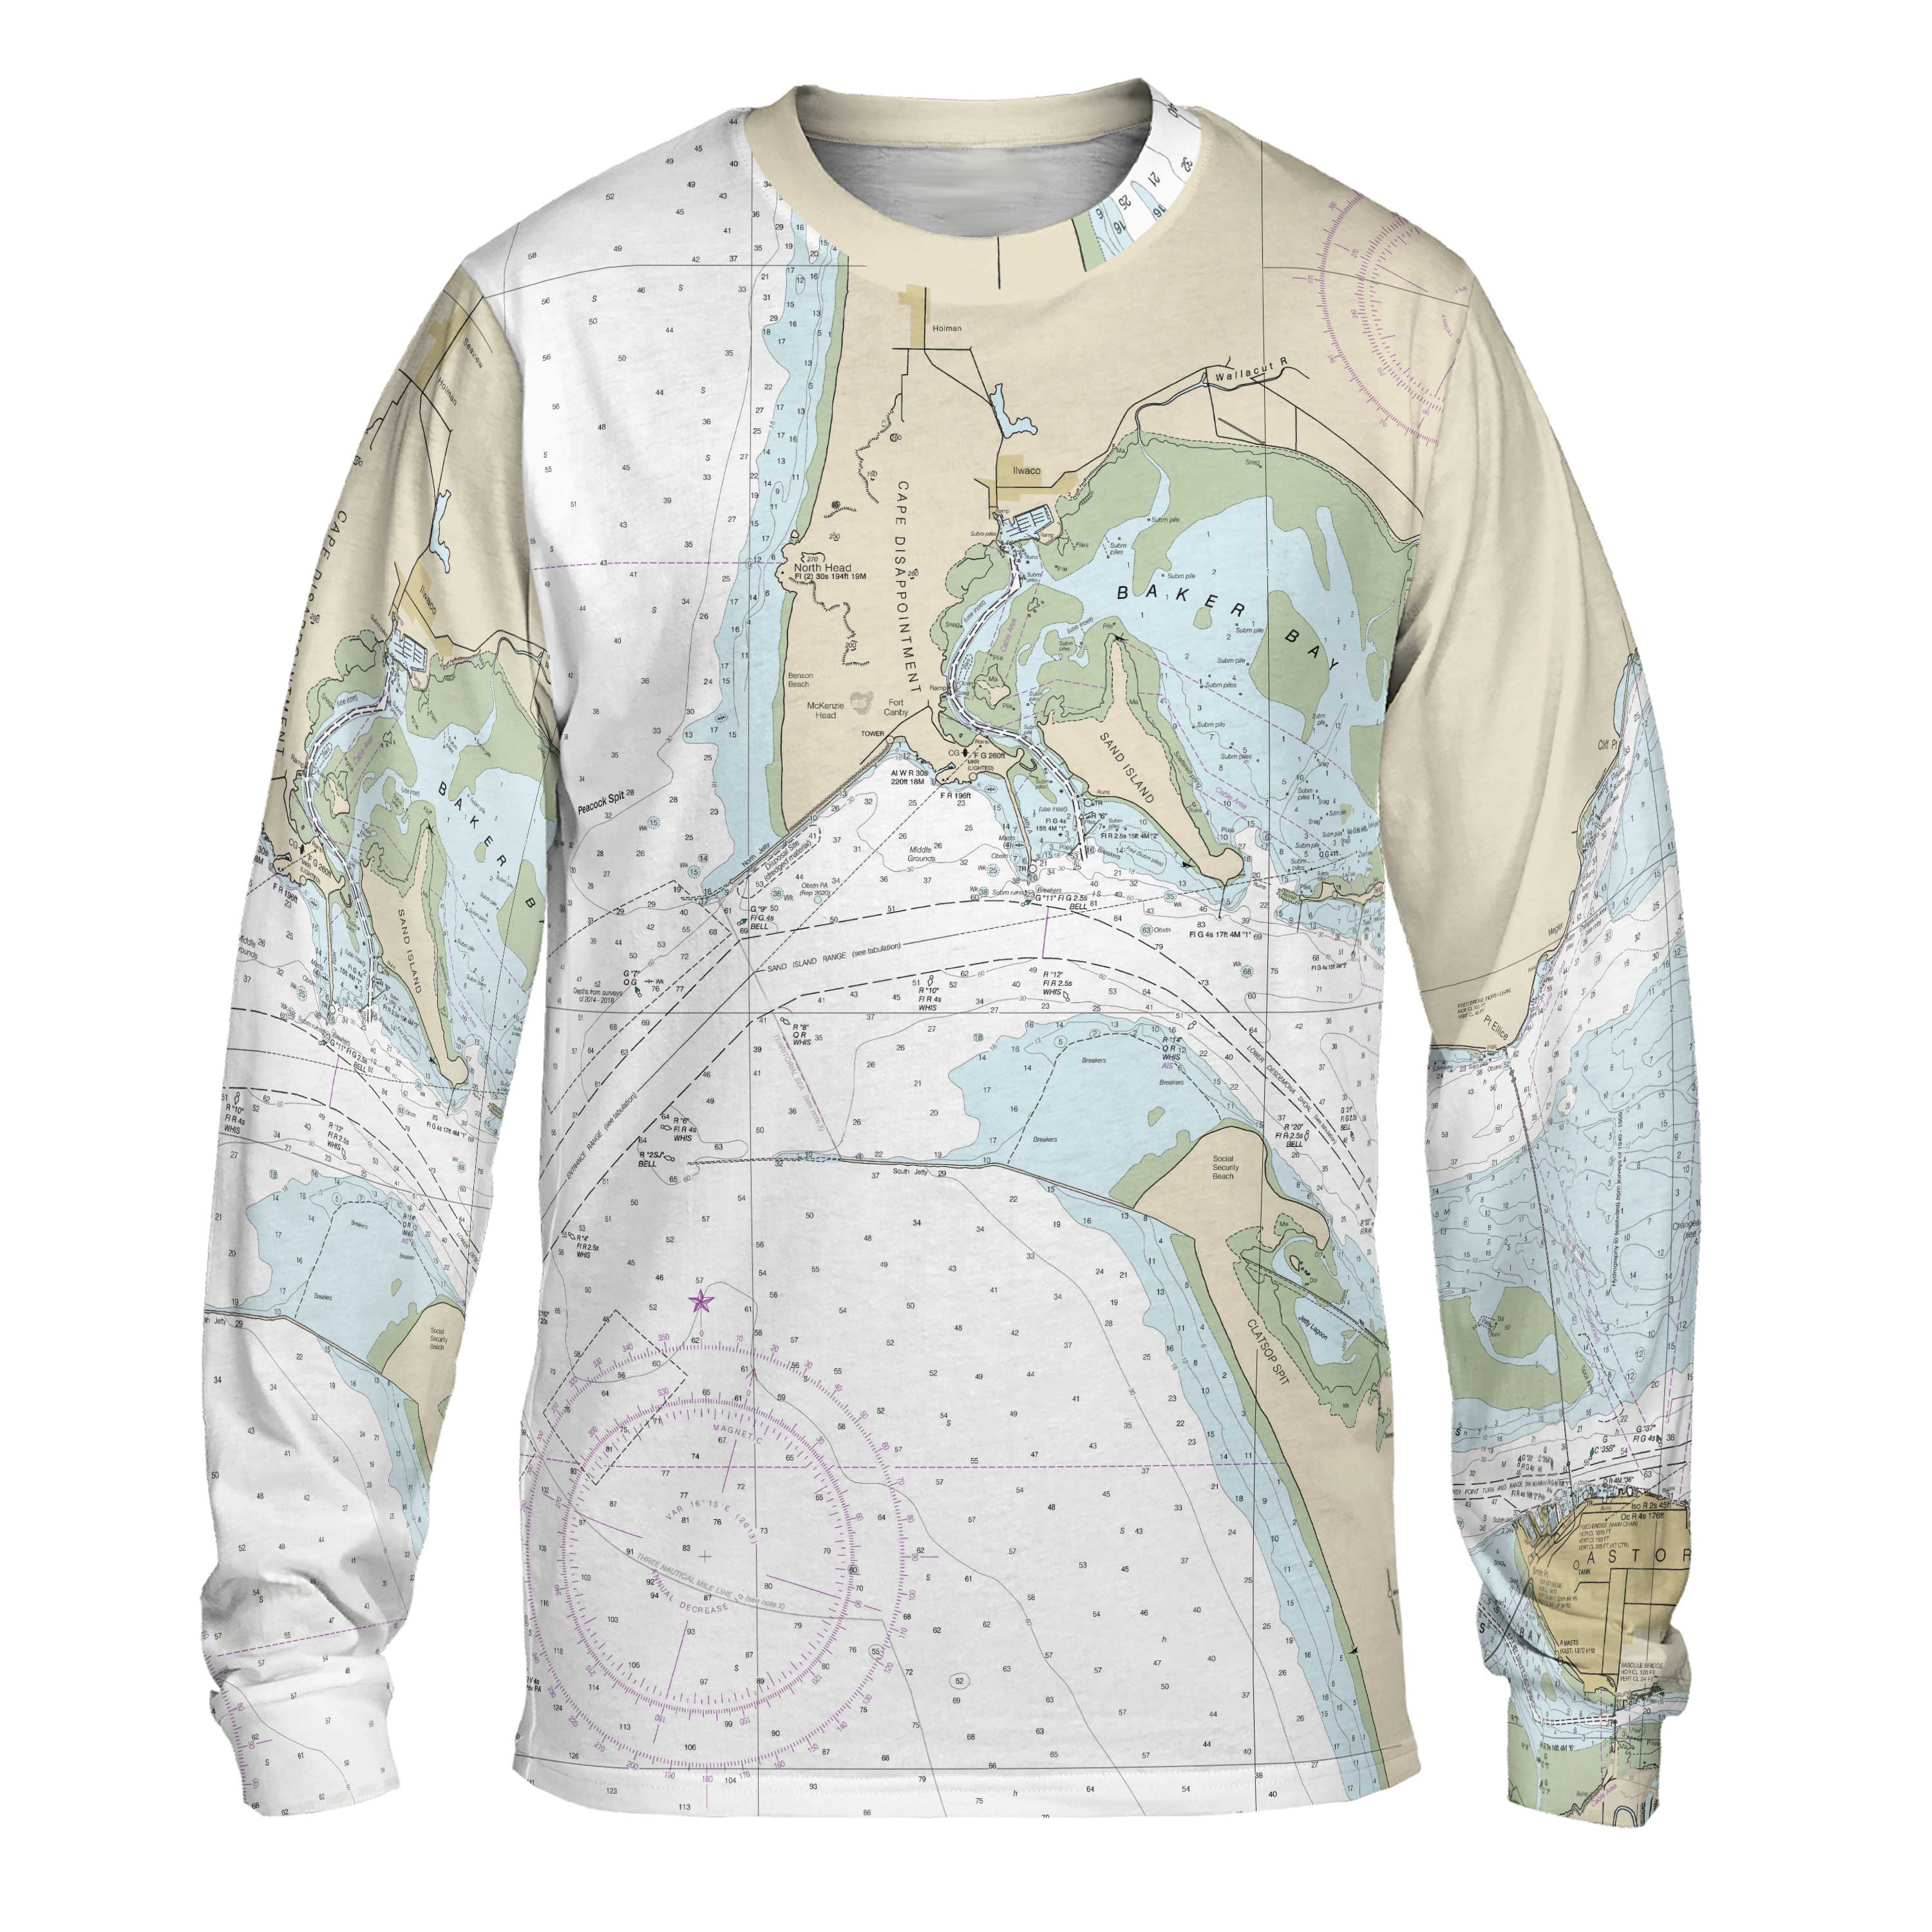 The Cape Disappointment Long Sleeve Tee